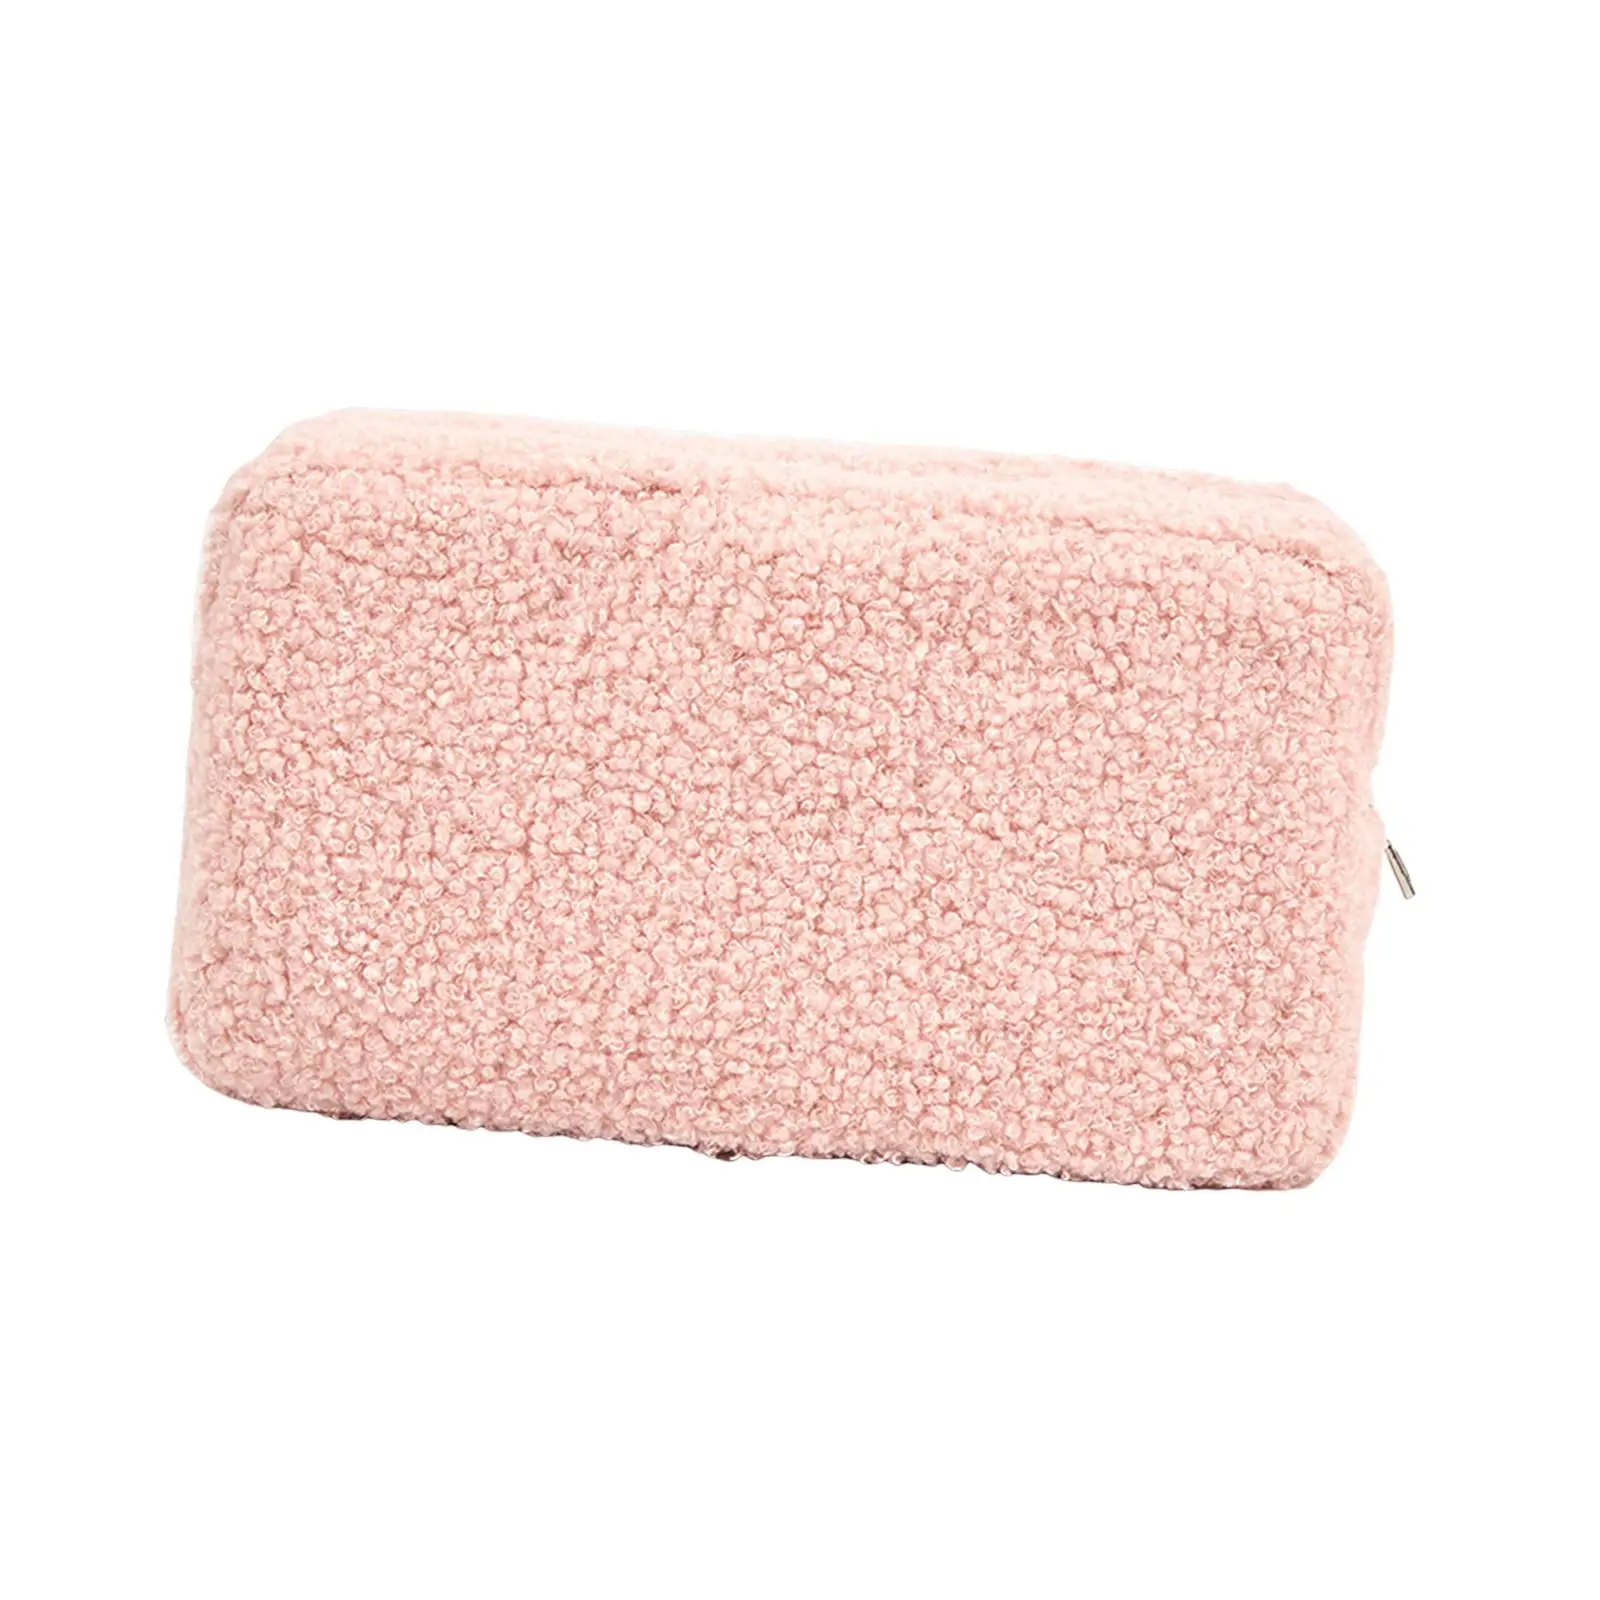 Cosmetic Storage Bag Plush Fabric Multifunctional Durable Cosmetic Pouch for Toiletries Cosmetics Traveling Business Trip Girls